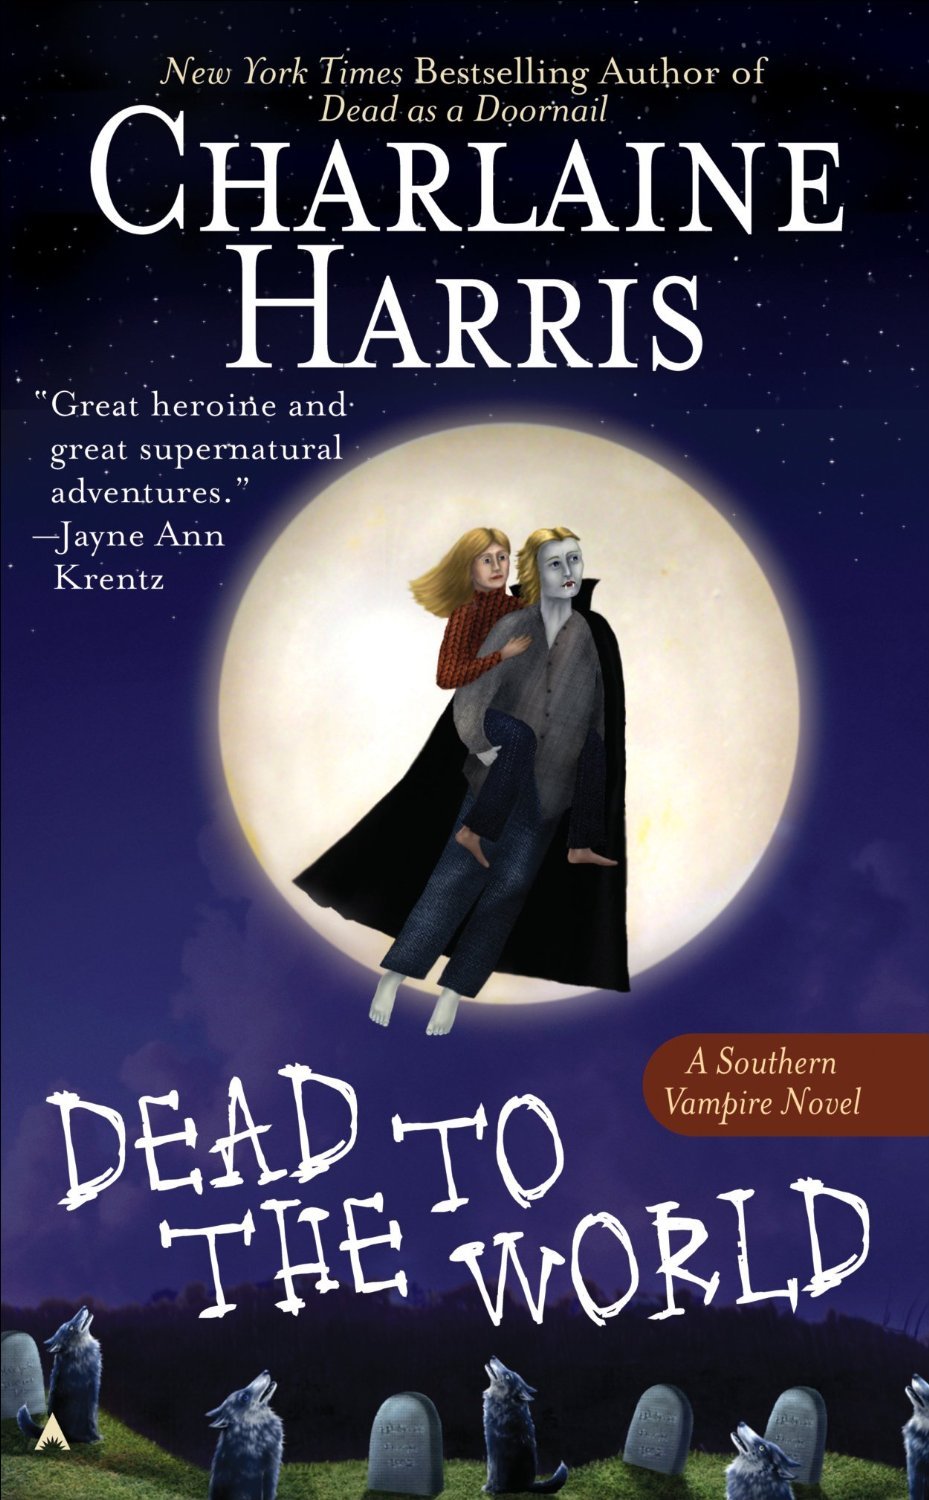 Dead to the World (Sookie Stackhouse, #4) books